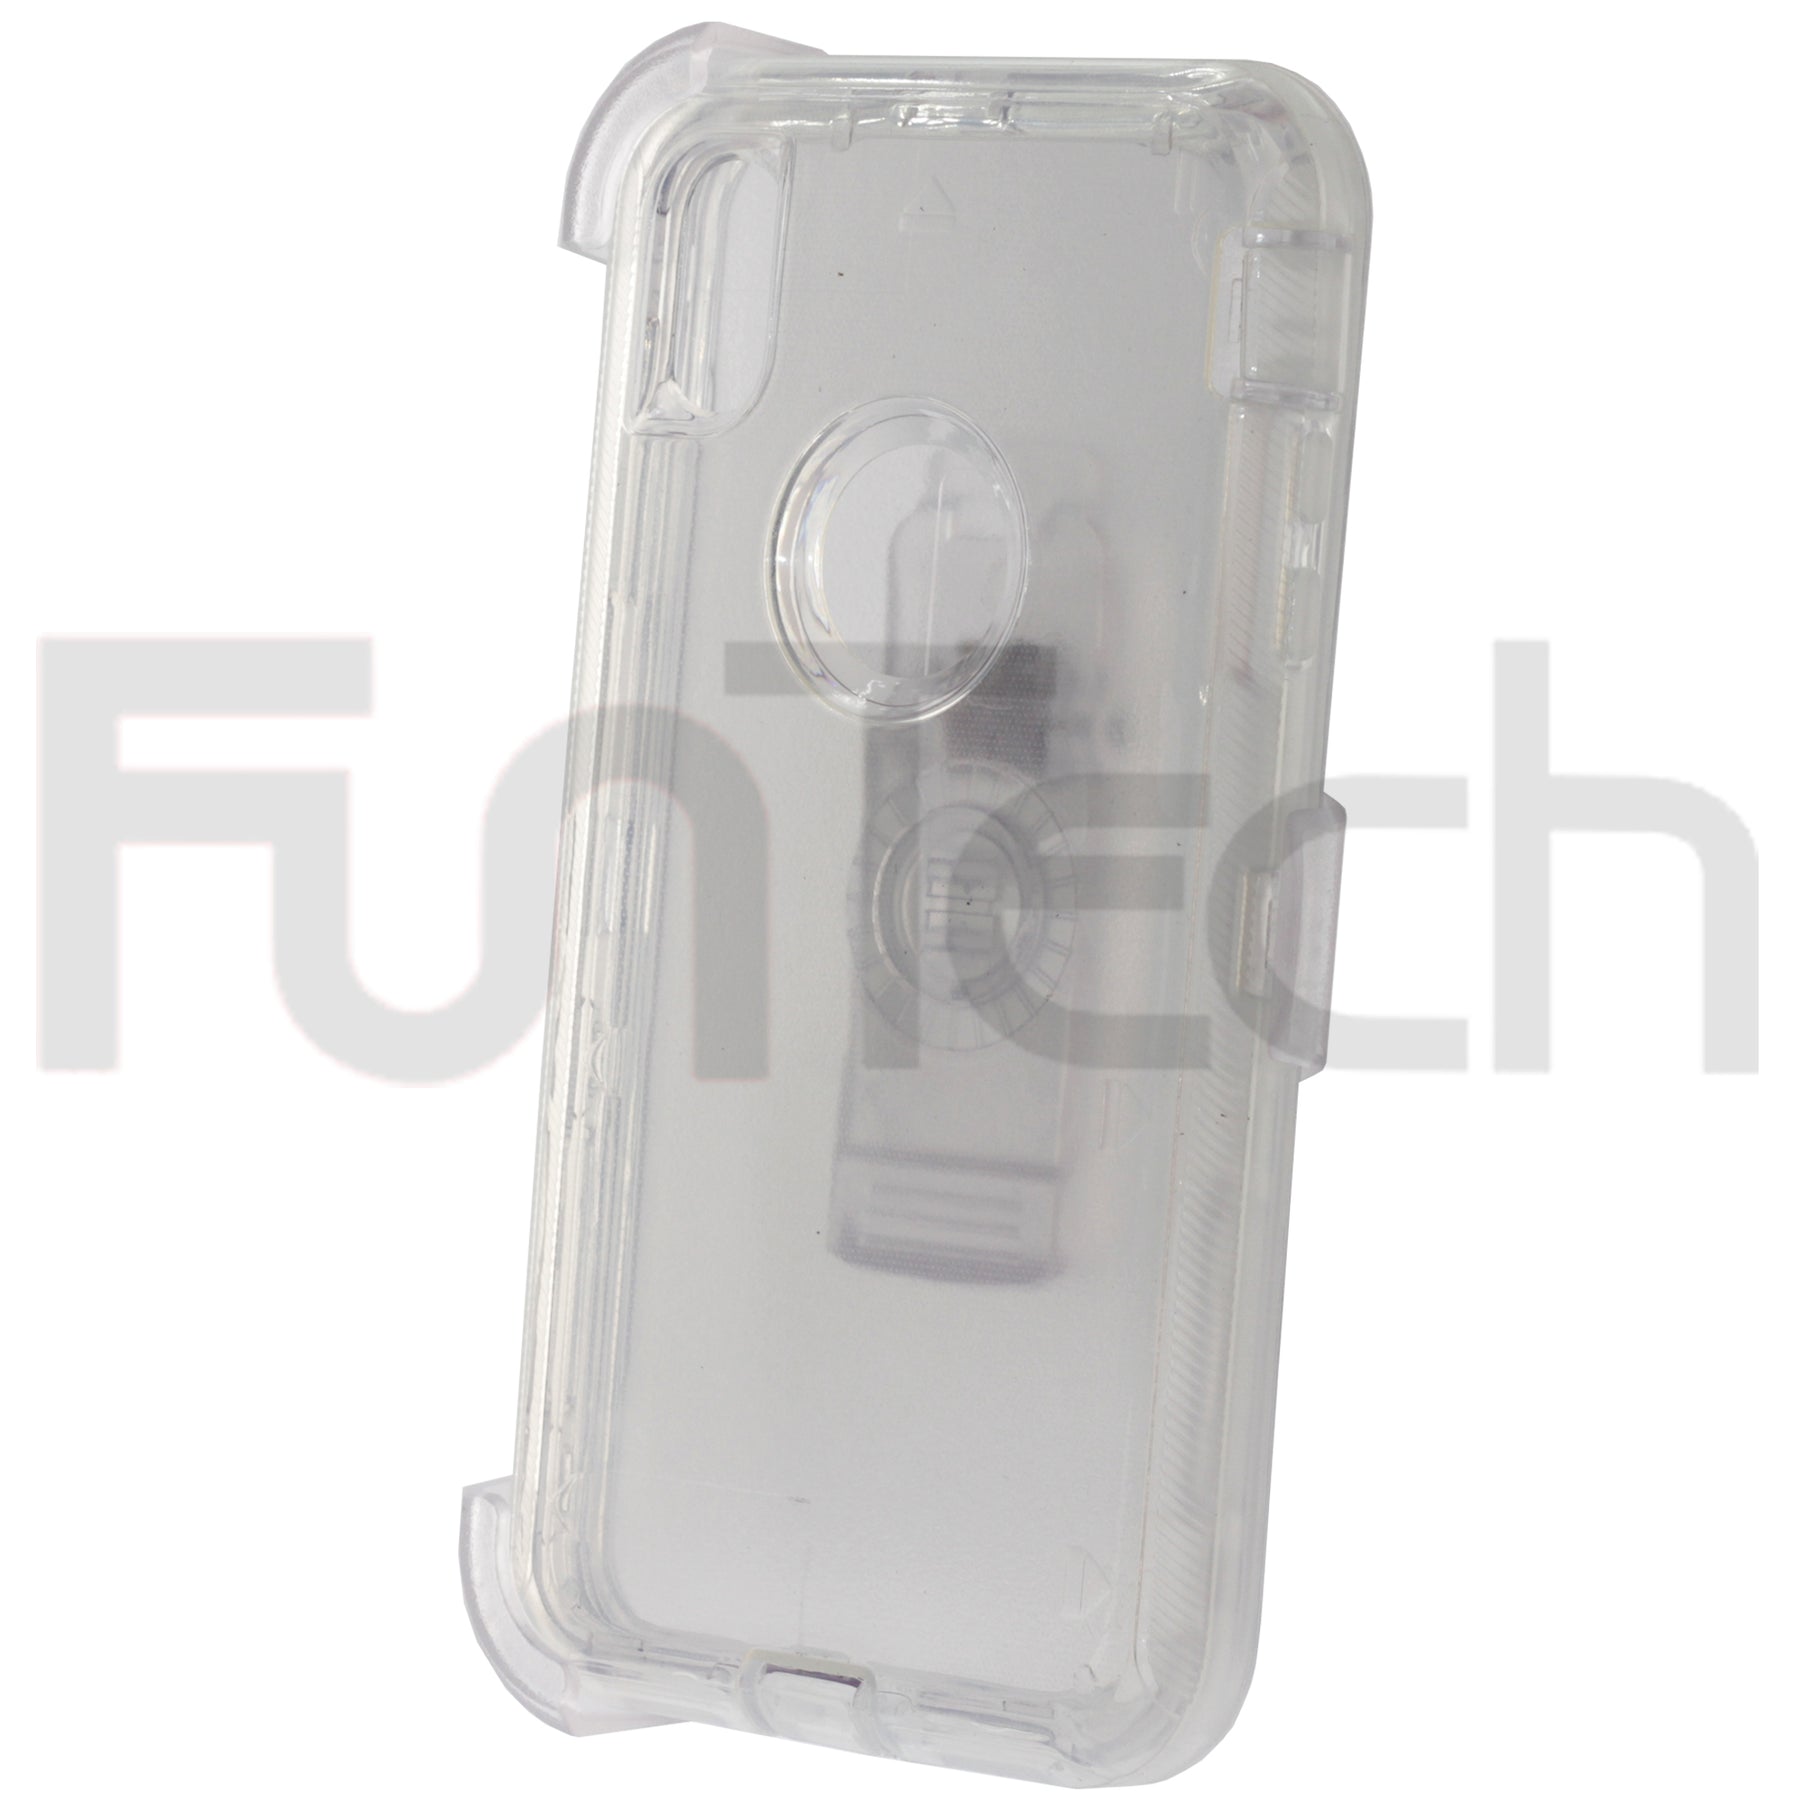 Apple iPhone XS Max, Defender Case, Color Clear.